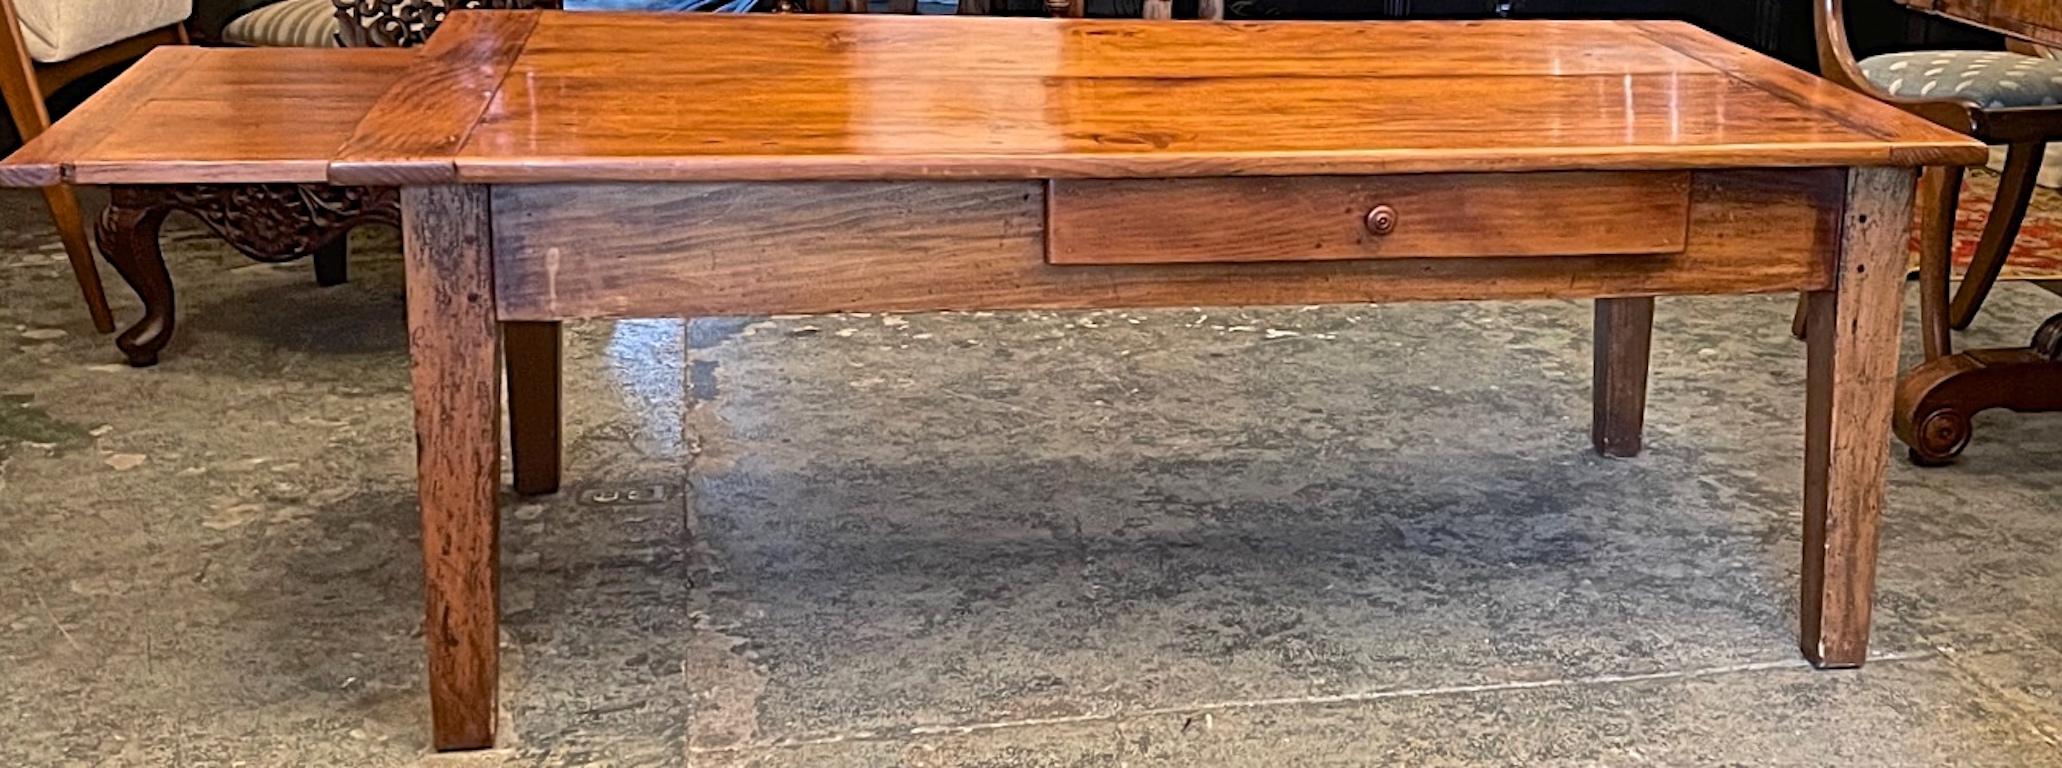 French 19th Century Cherrywood Coffee Table With Extension And One Side Drawer In Distressed Condition For Sale In Santa Monica, CA